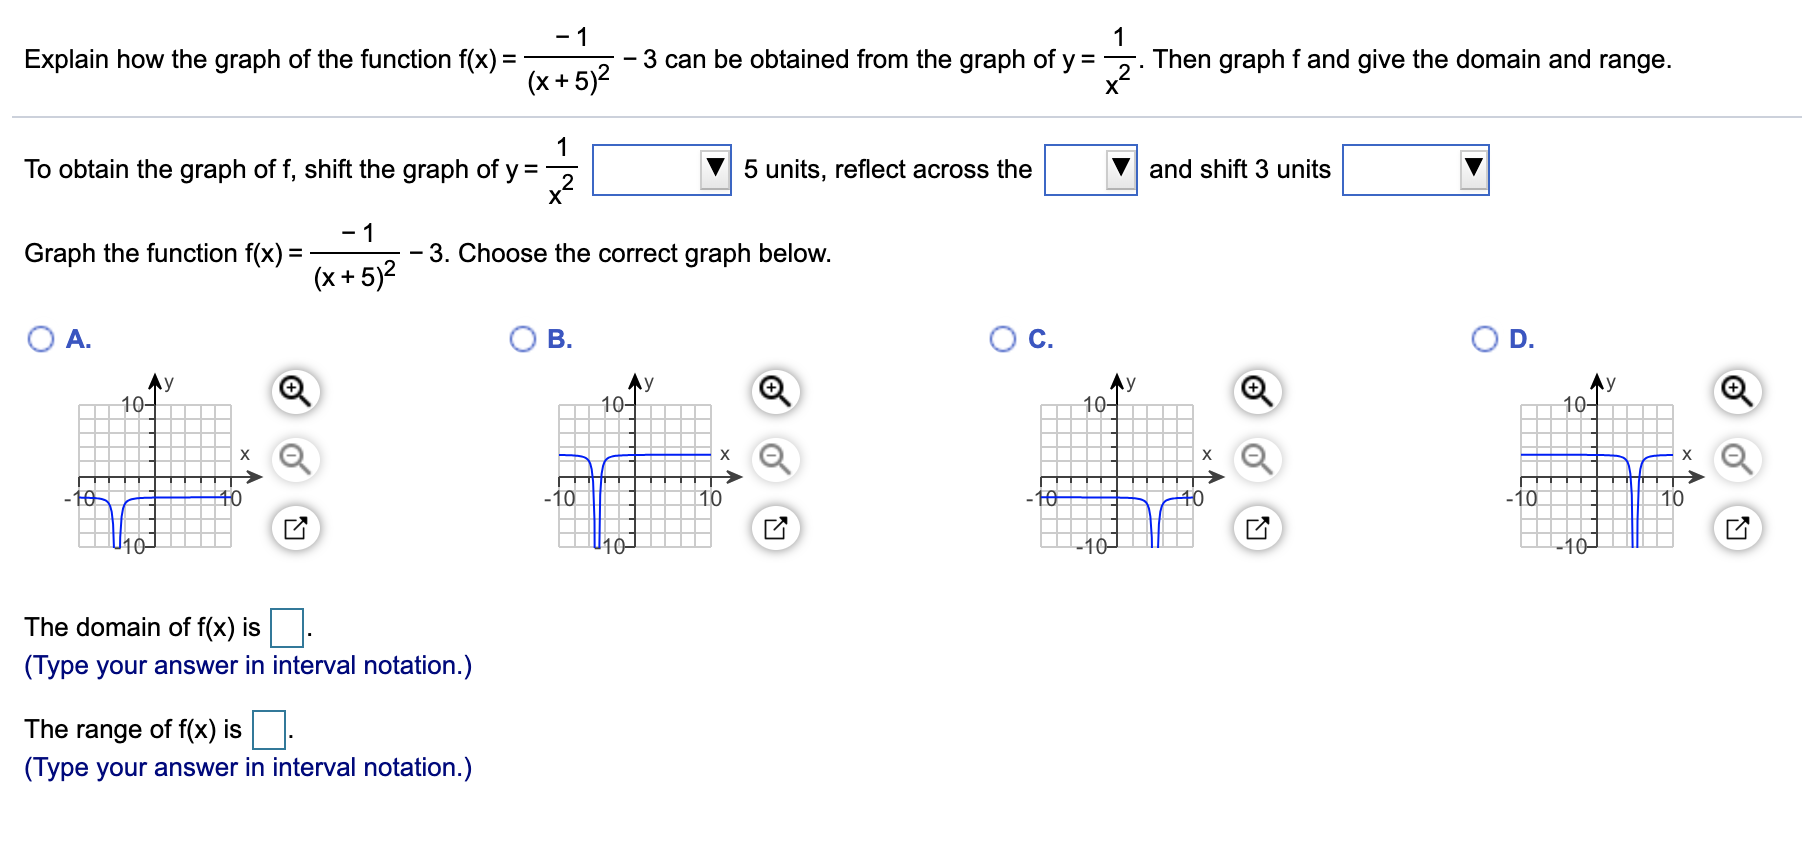 - 1
- 3 can be obtained from the graph of y =-
Then graph f and give the domain and range.
Explain how the graph of the function f(x) =
(x +5)2
To obtain the graph of f, shift the graph of y =
5 units, reflect across the
and shift 3 units
- 3. Choose the correct graph below.
Graph the function f(x) :
(x + 5)2
O A.
Oc.
B.
D.
Ay
10-
Ay
10-
10-
10-
х
to
-10
40
10
10
+0
-10
10
10–
10–
-10–
The domain of f(x) is
(Type your answer in interval notation.)
The range of f(x) is.
(Type your answer in interval notation.)
